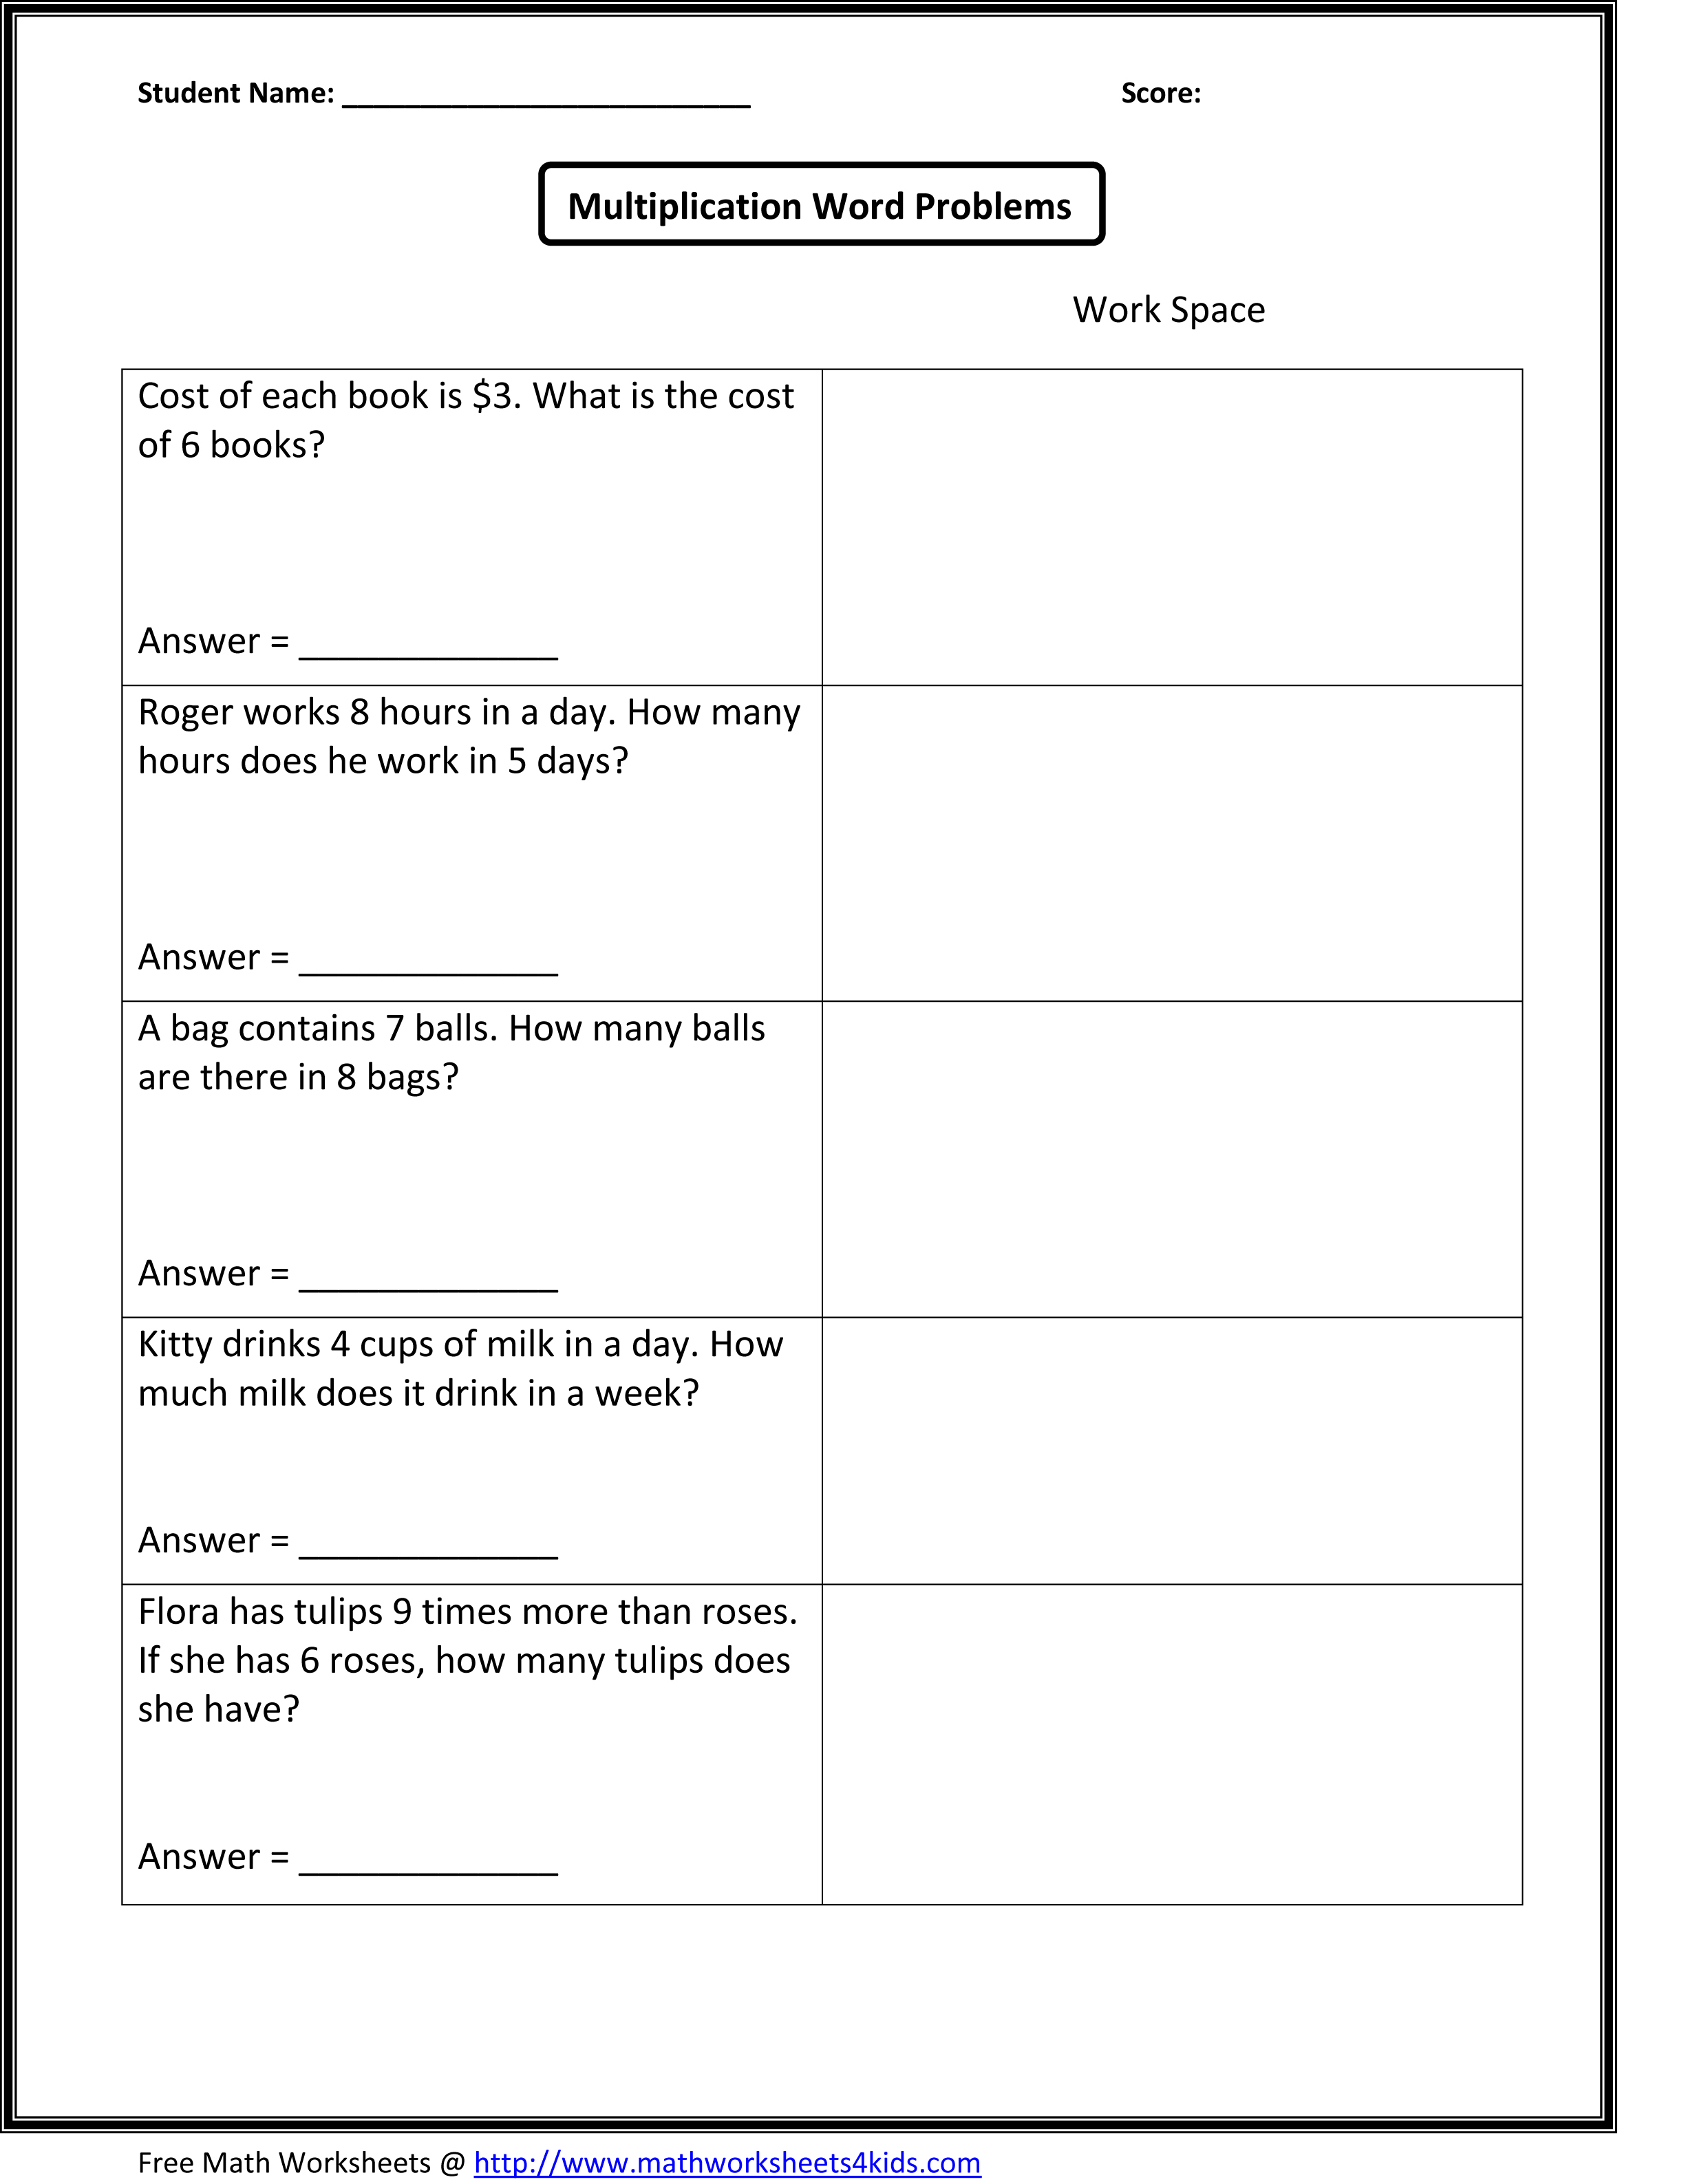 13-best-images-of-math-worksheets-more-or-less-10-more-or-less-worksheets-10-more-10-less